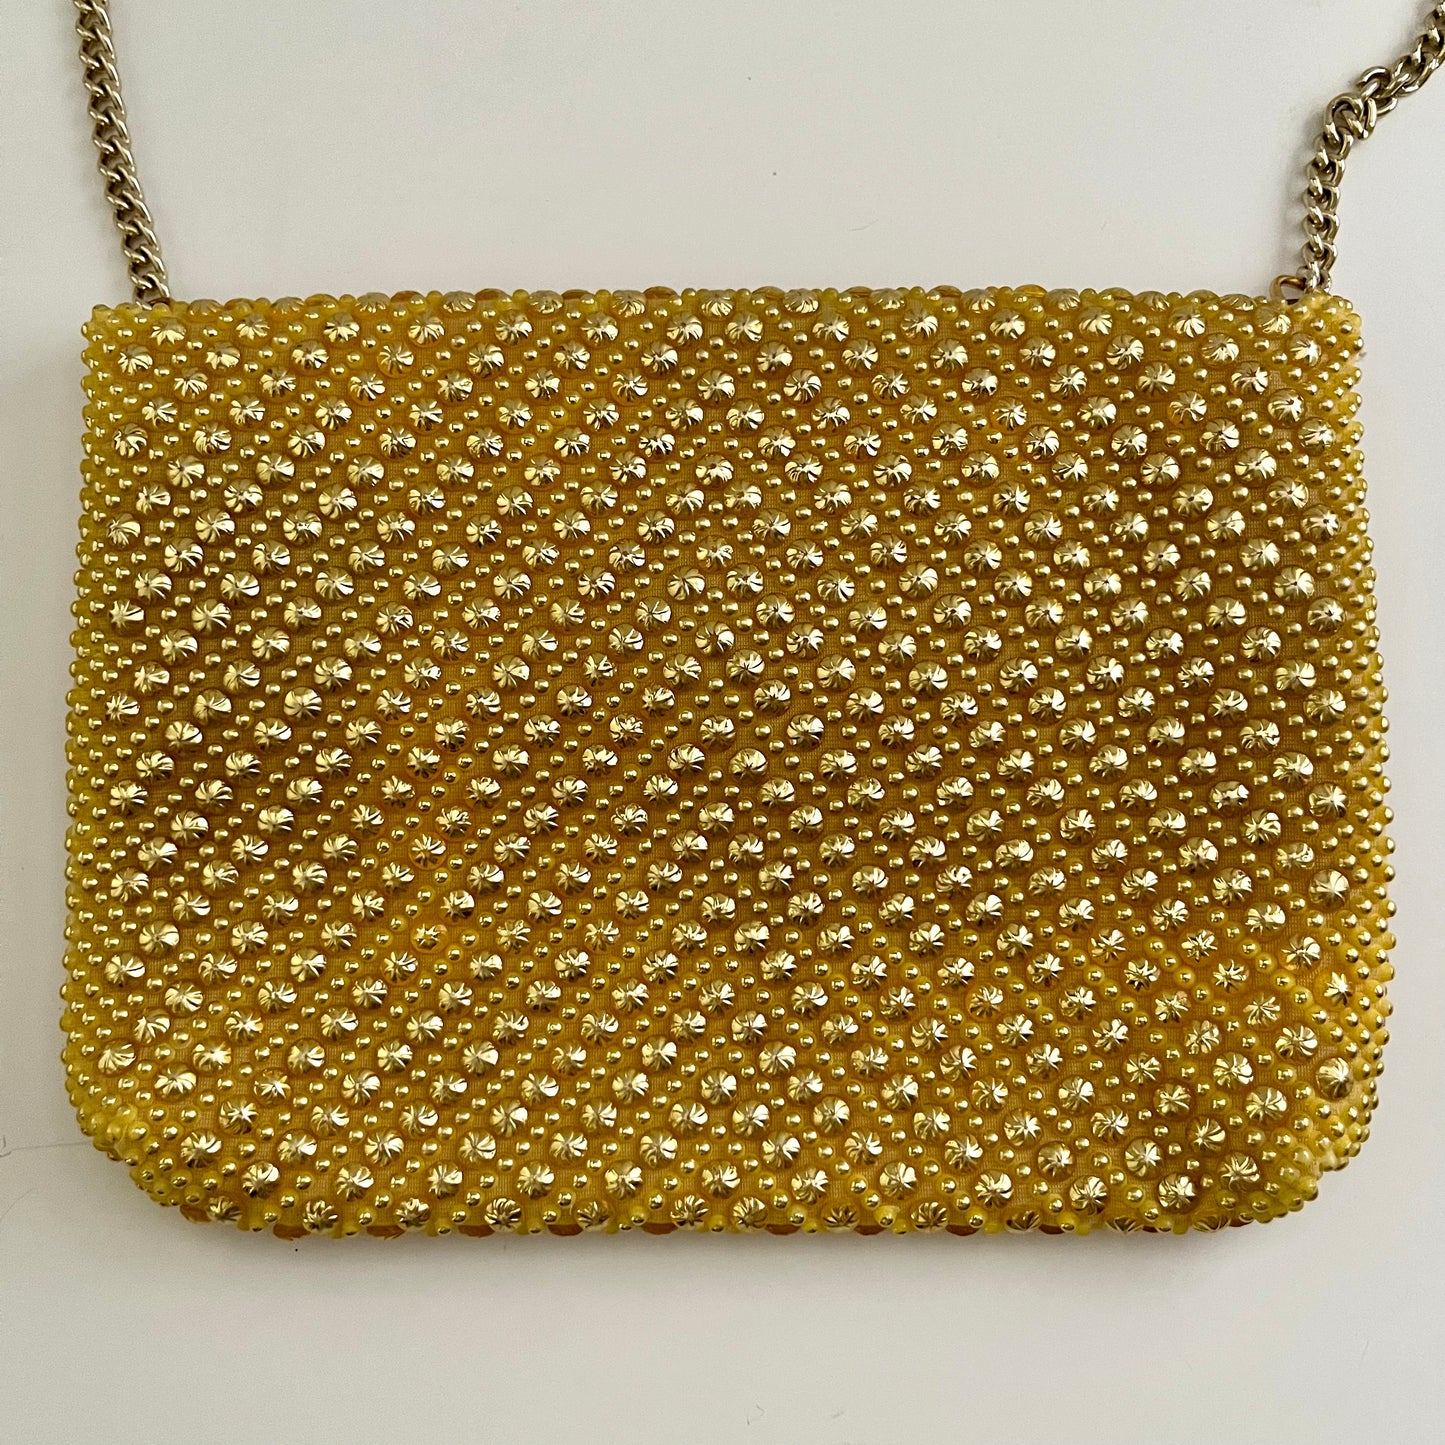 Late 70s/ Early 80s Made in Hong Kong Bead Purse